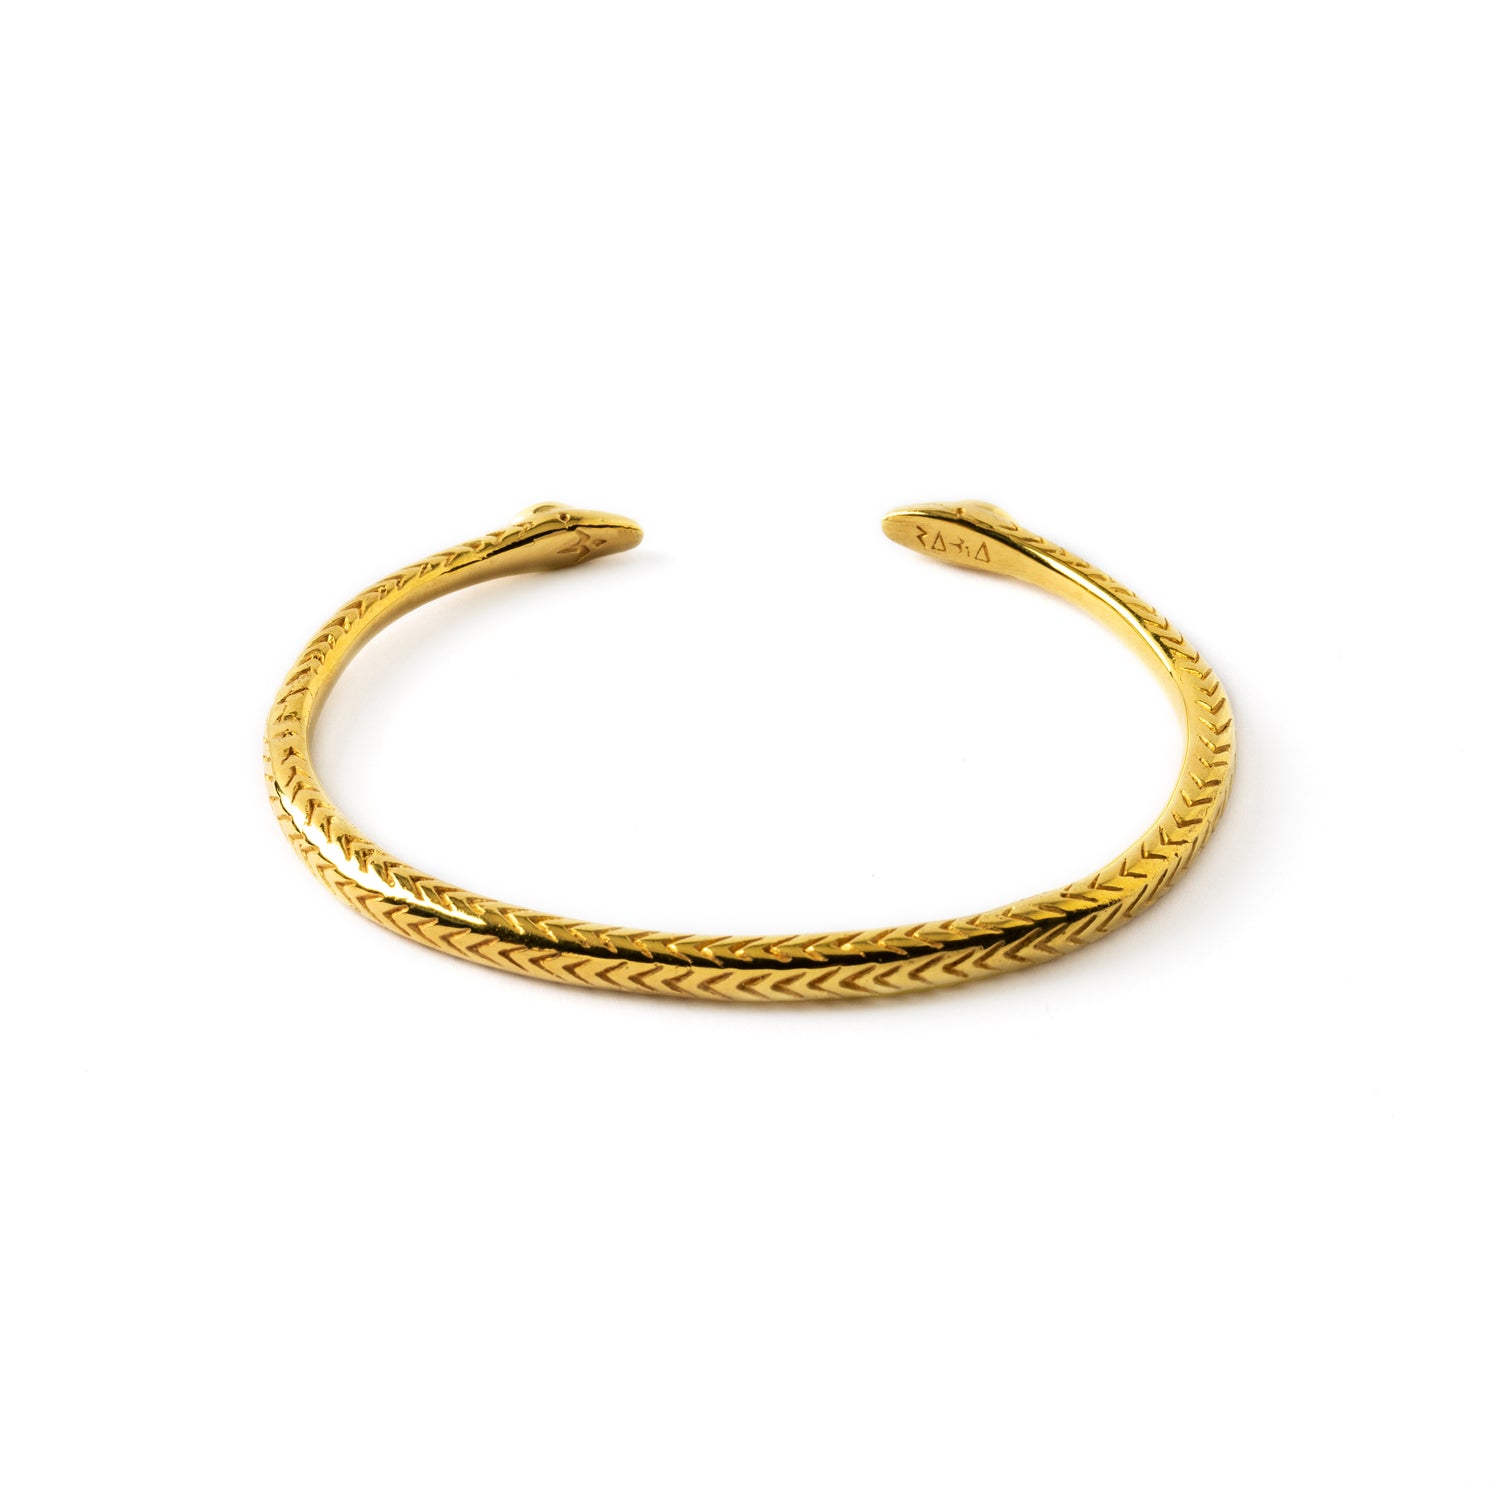 Nagi Gold Cuff with Ruby back side view